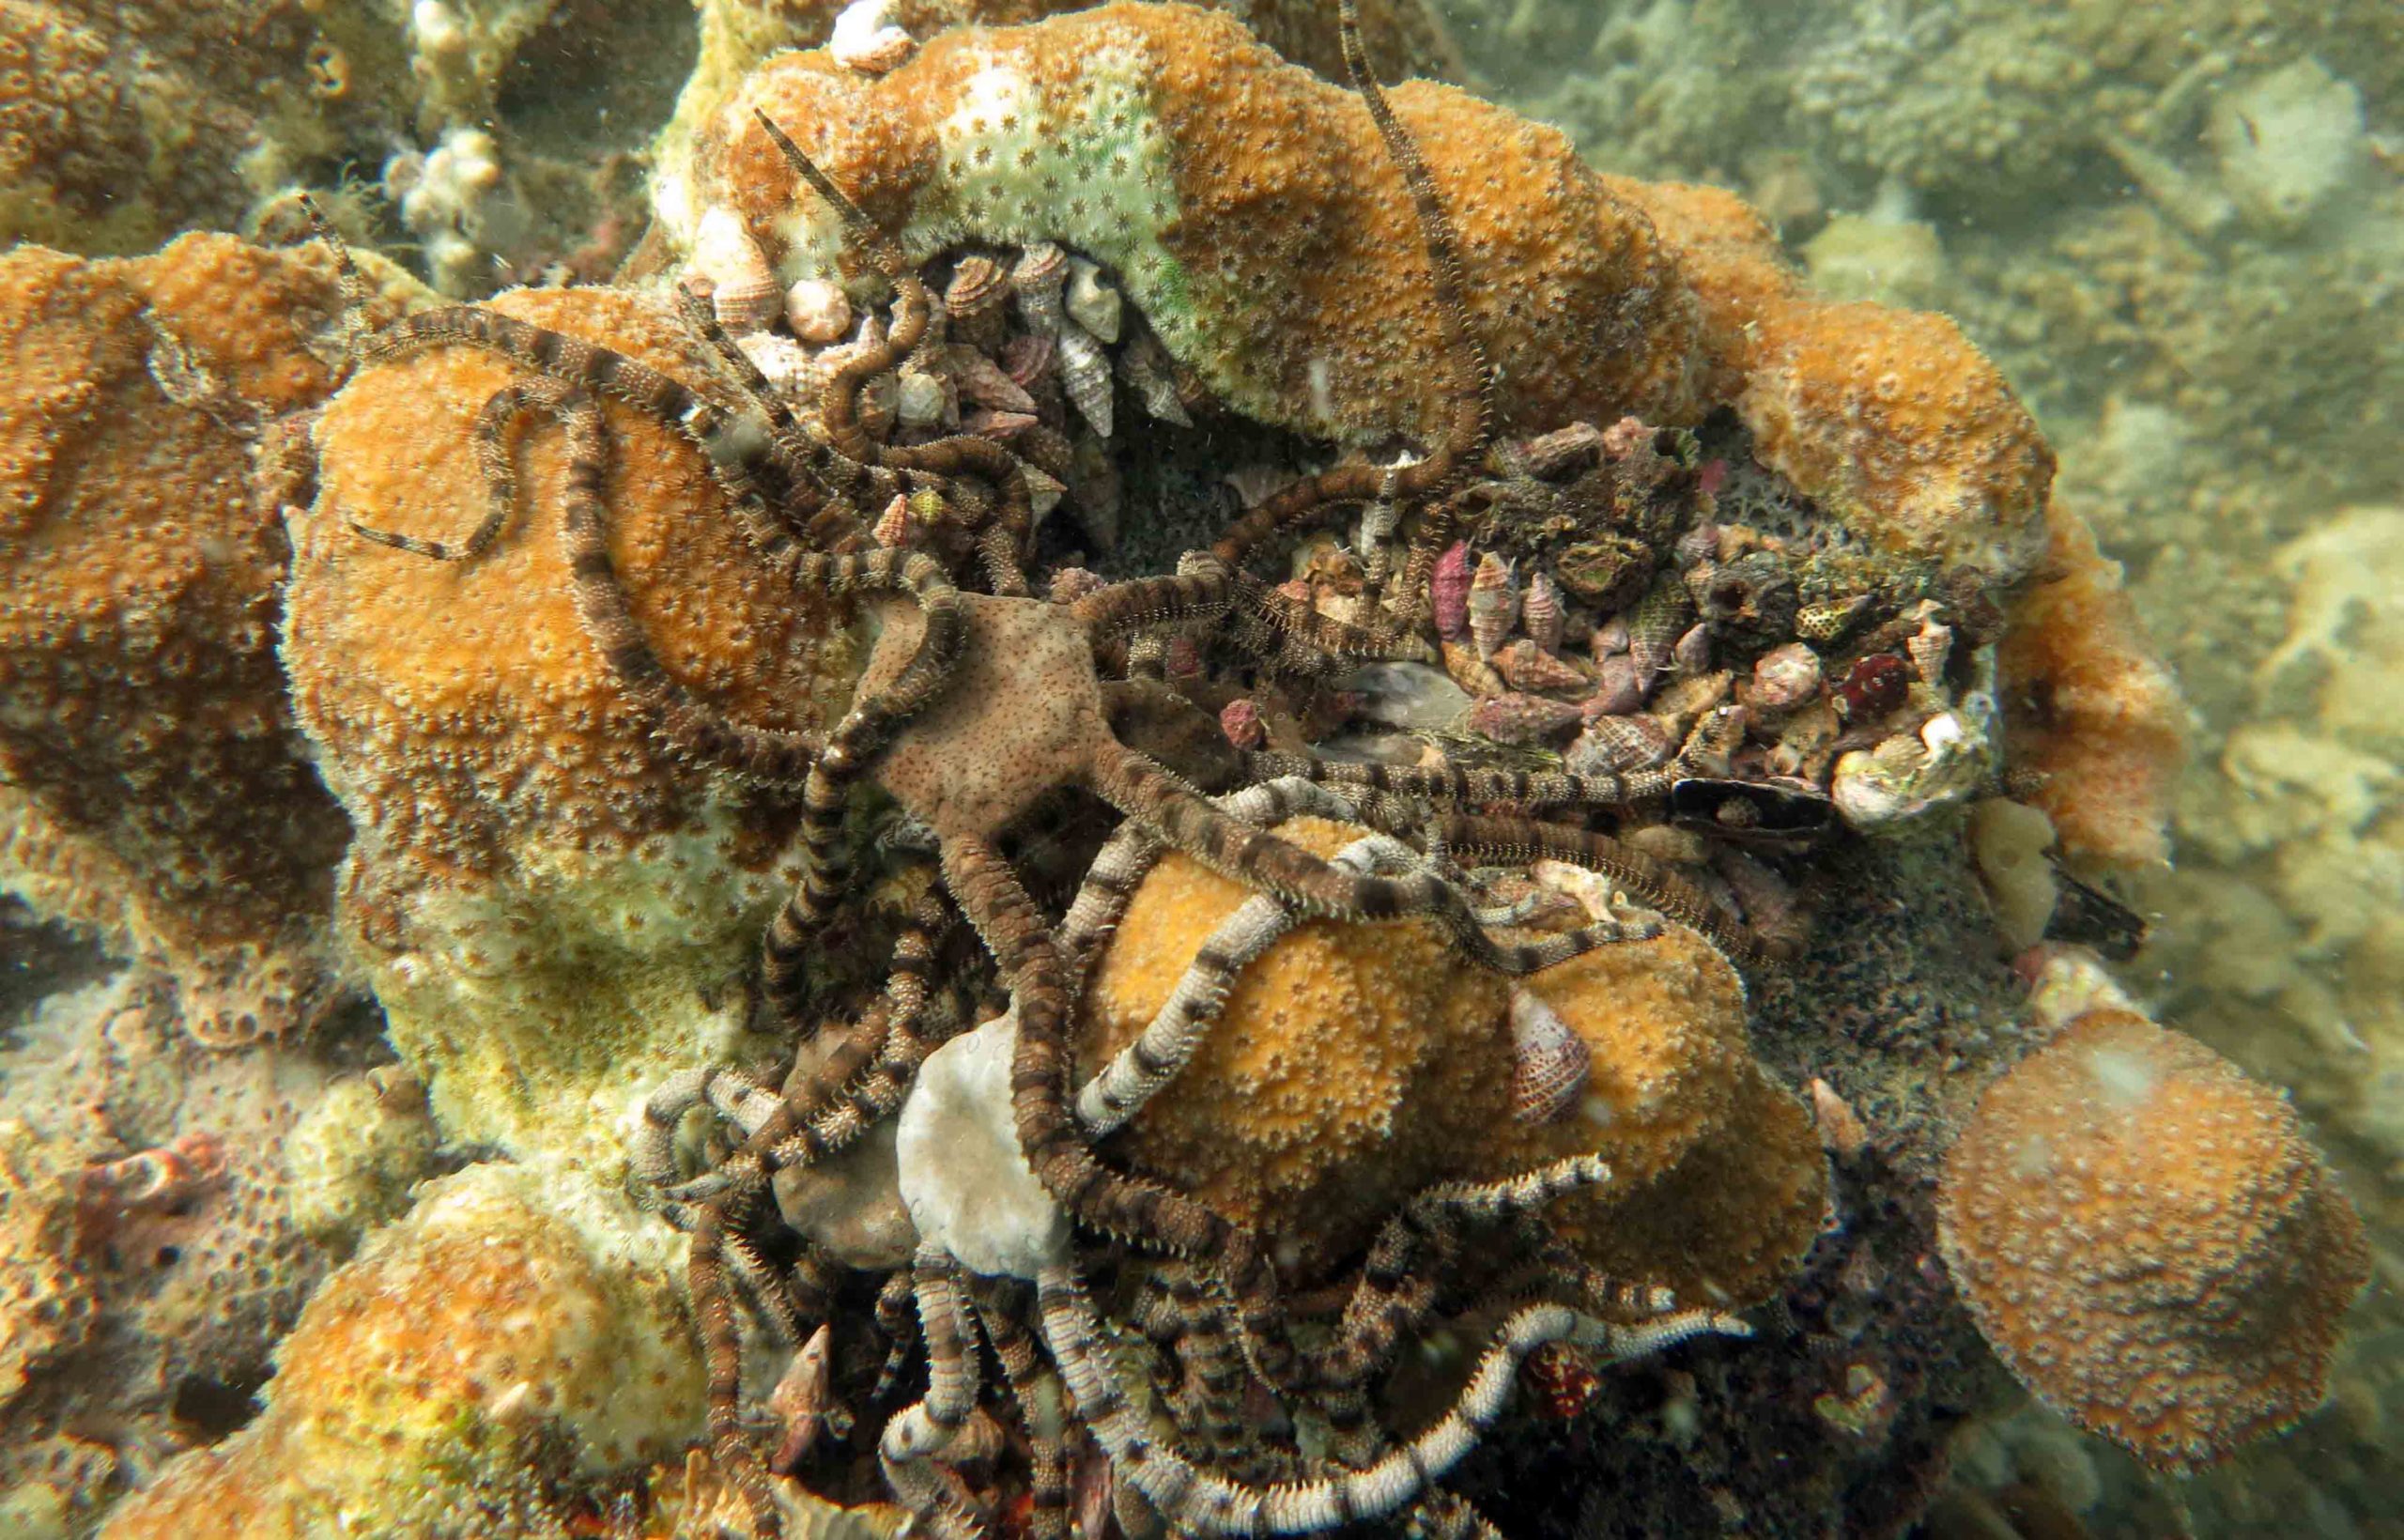 These brittle stars climbed onto coral in an attempt to reach oxygen during a hypoxia event off the coast of Panama in 2017. Normally they would be hiding during the day. (Photo courtesy of Maggie Johnson)